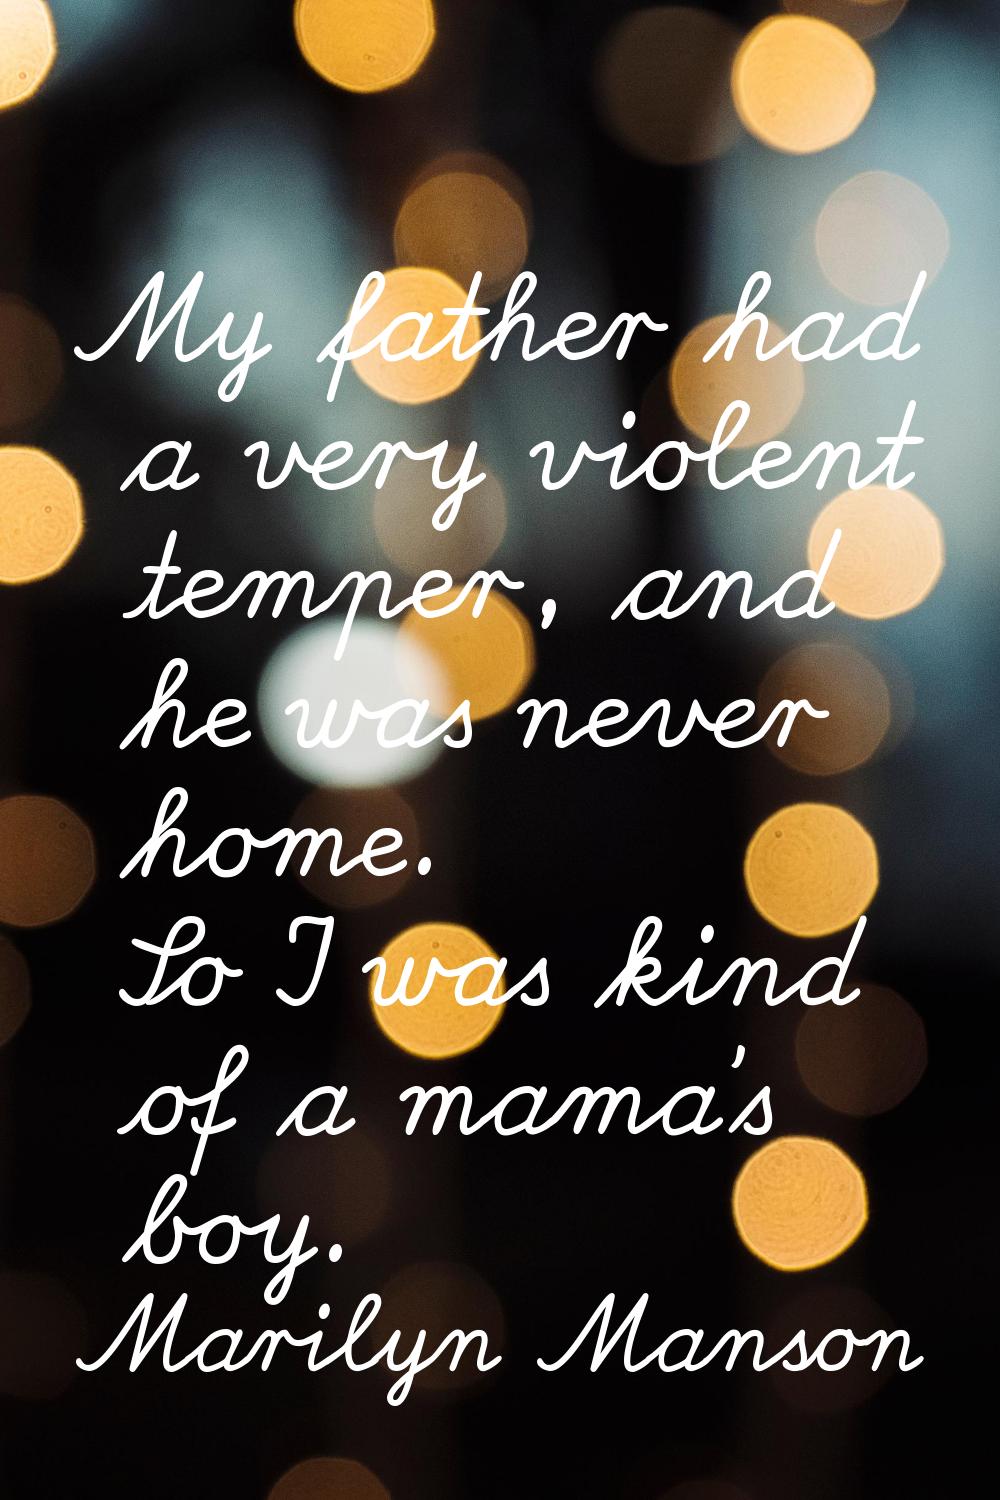 My father had a very violent temper, and he was never home. So I was kind of a mama's boy.